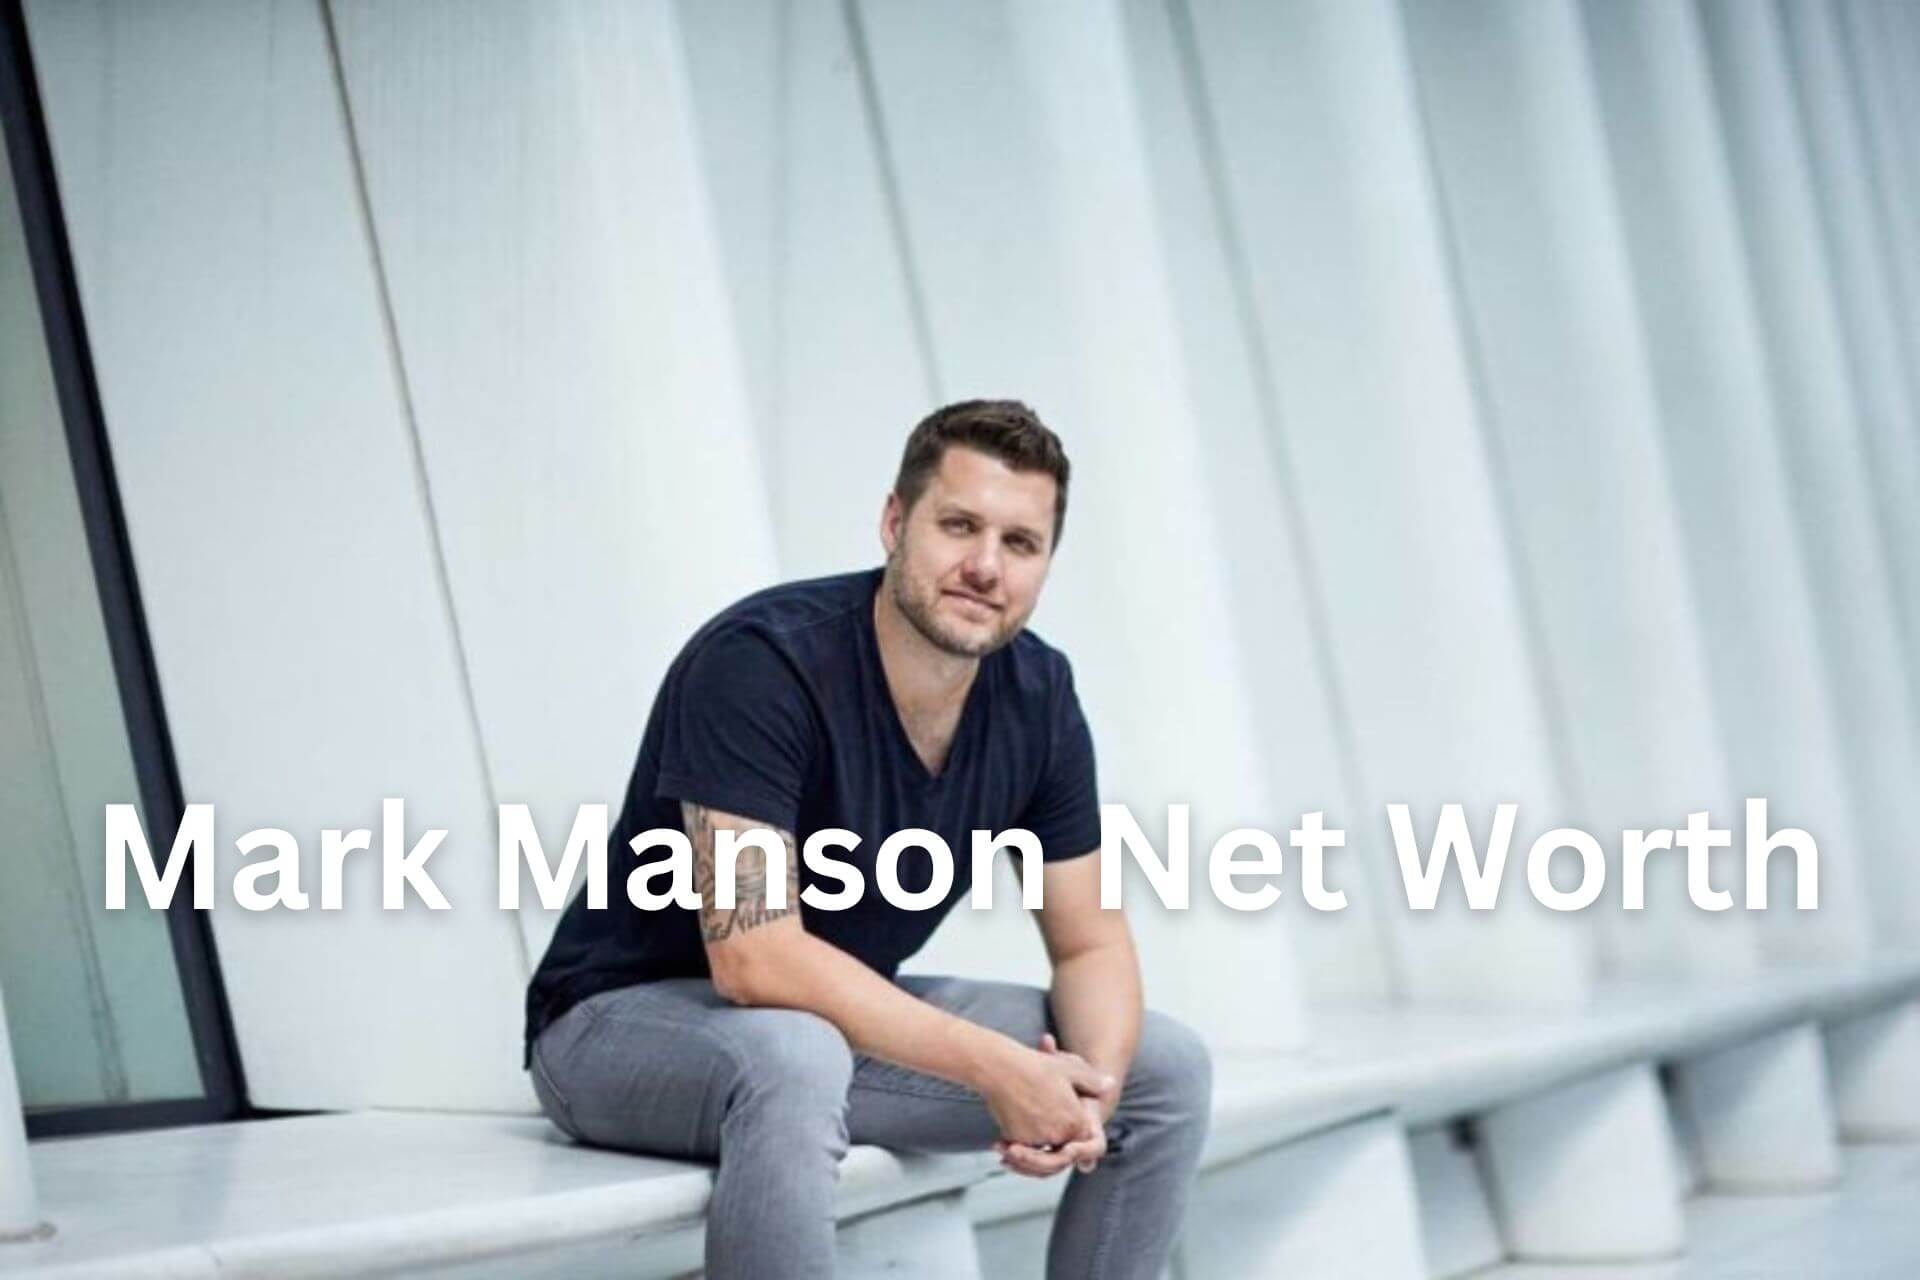 Mark Manson Net Worth, Books, Wife, Models, Quotes, Podcasts, Twitter